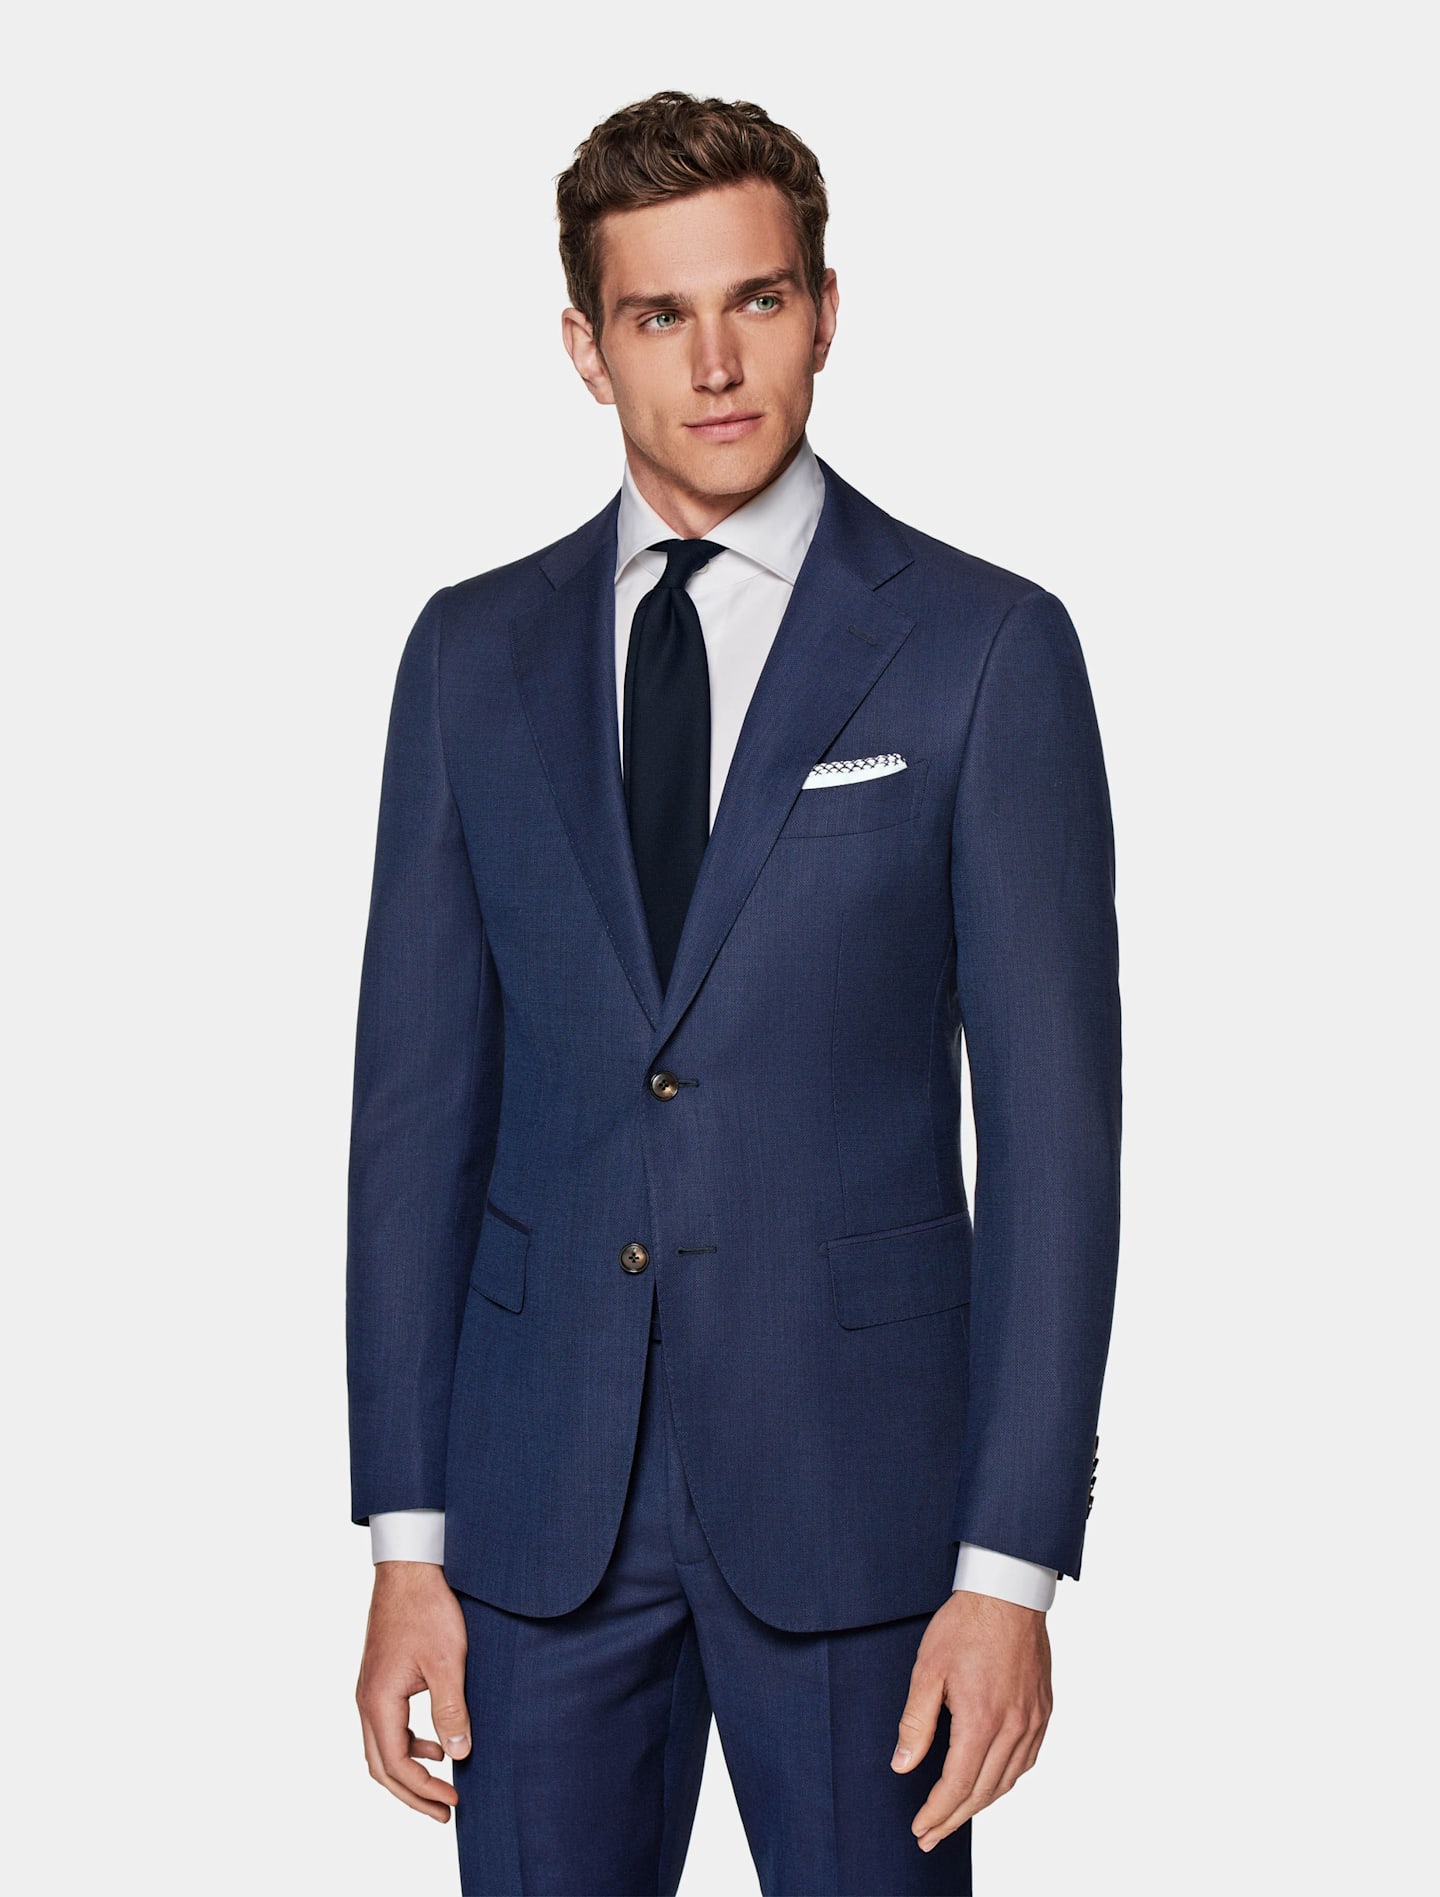 Navy Perennial suit for a formal wedding dress. code.